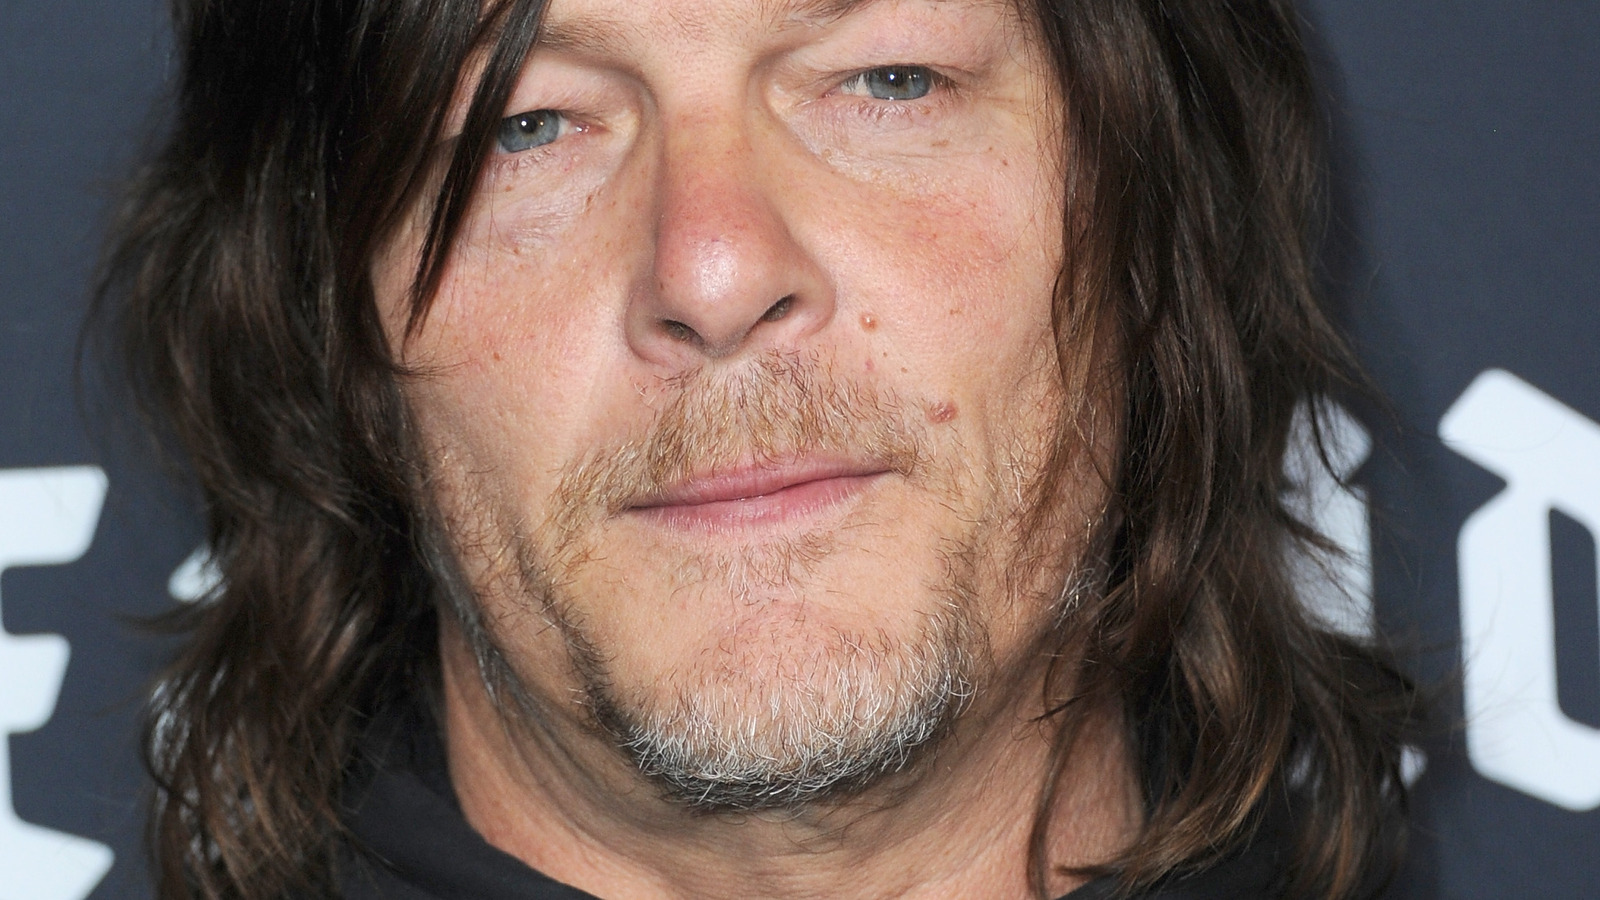 What We Know About Norman Reedus’ Scary On-Set Injury